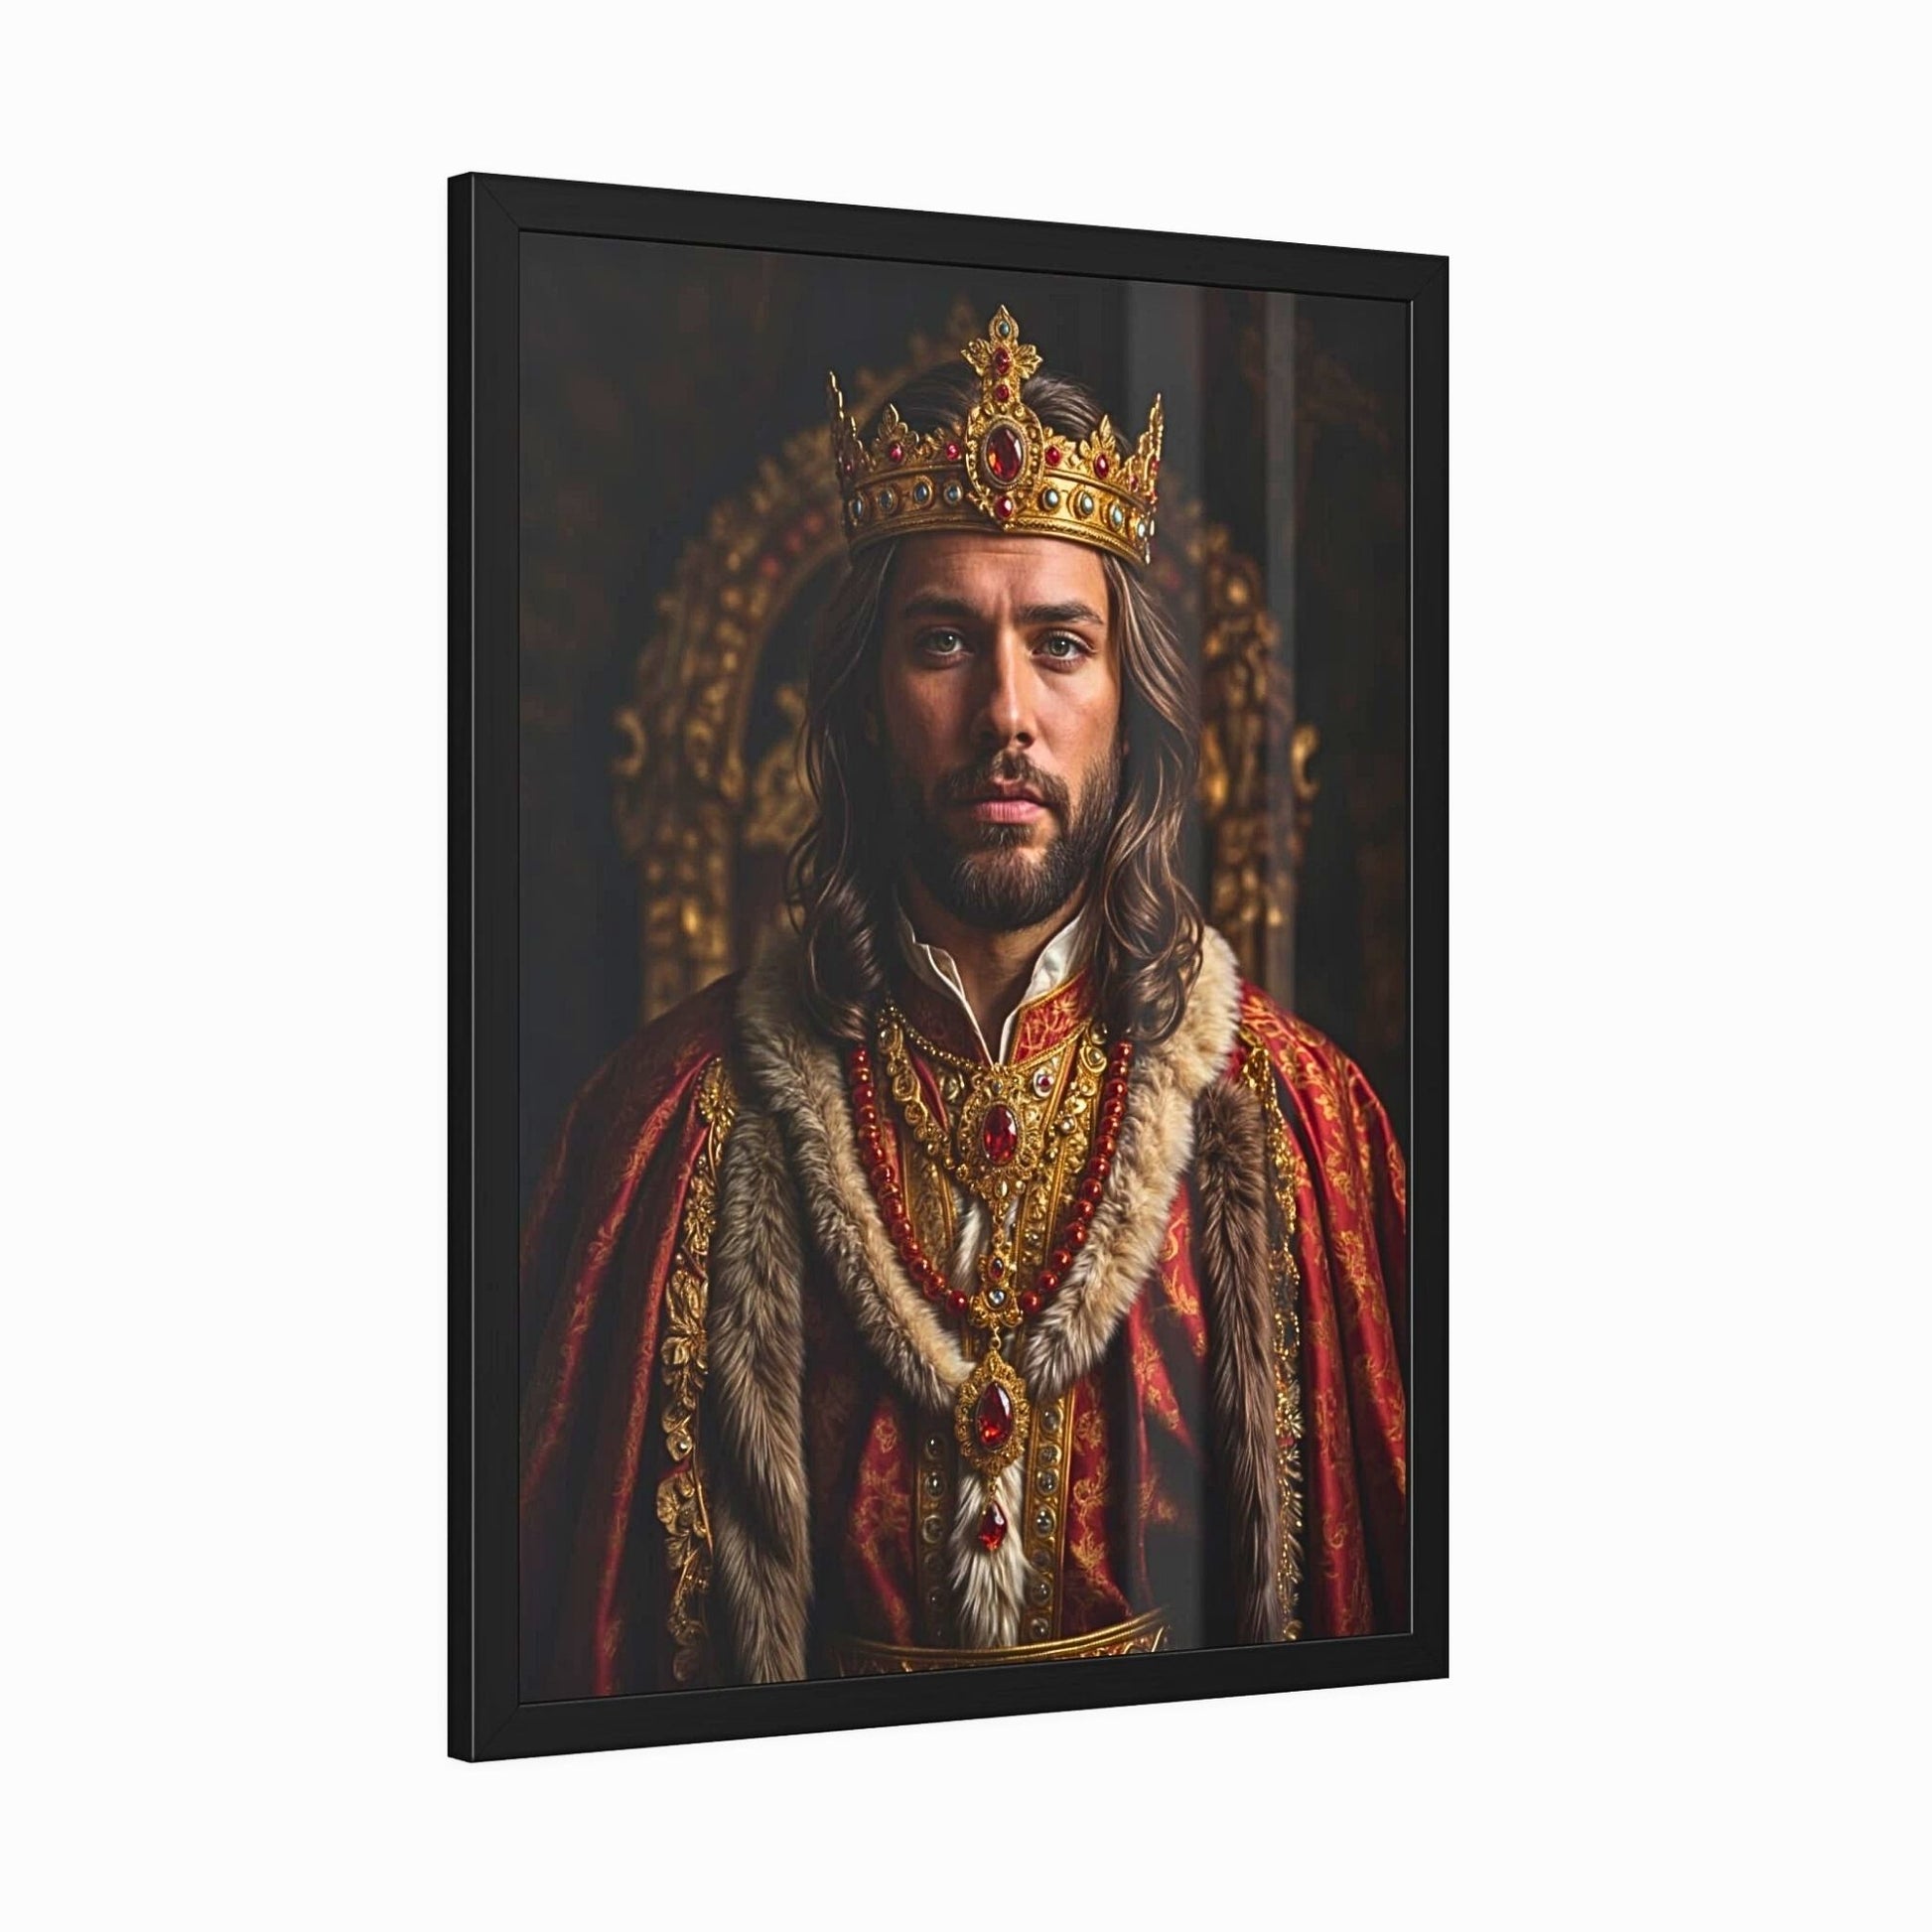 Create a captivating custom royal portrait inspired by the Renaissance, transforming your photo into a regal masterpiece. Whether for a birthday surprise or a thoughtful gesture for him, this personalized king portrait is a timeless gift. With its historical charm and digital download convenience, it's a unique way to honor special moments with a touch of regal elegance.